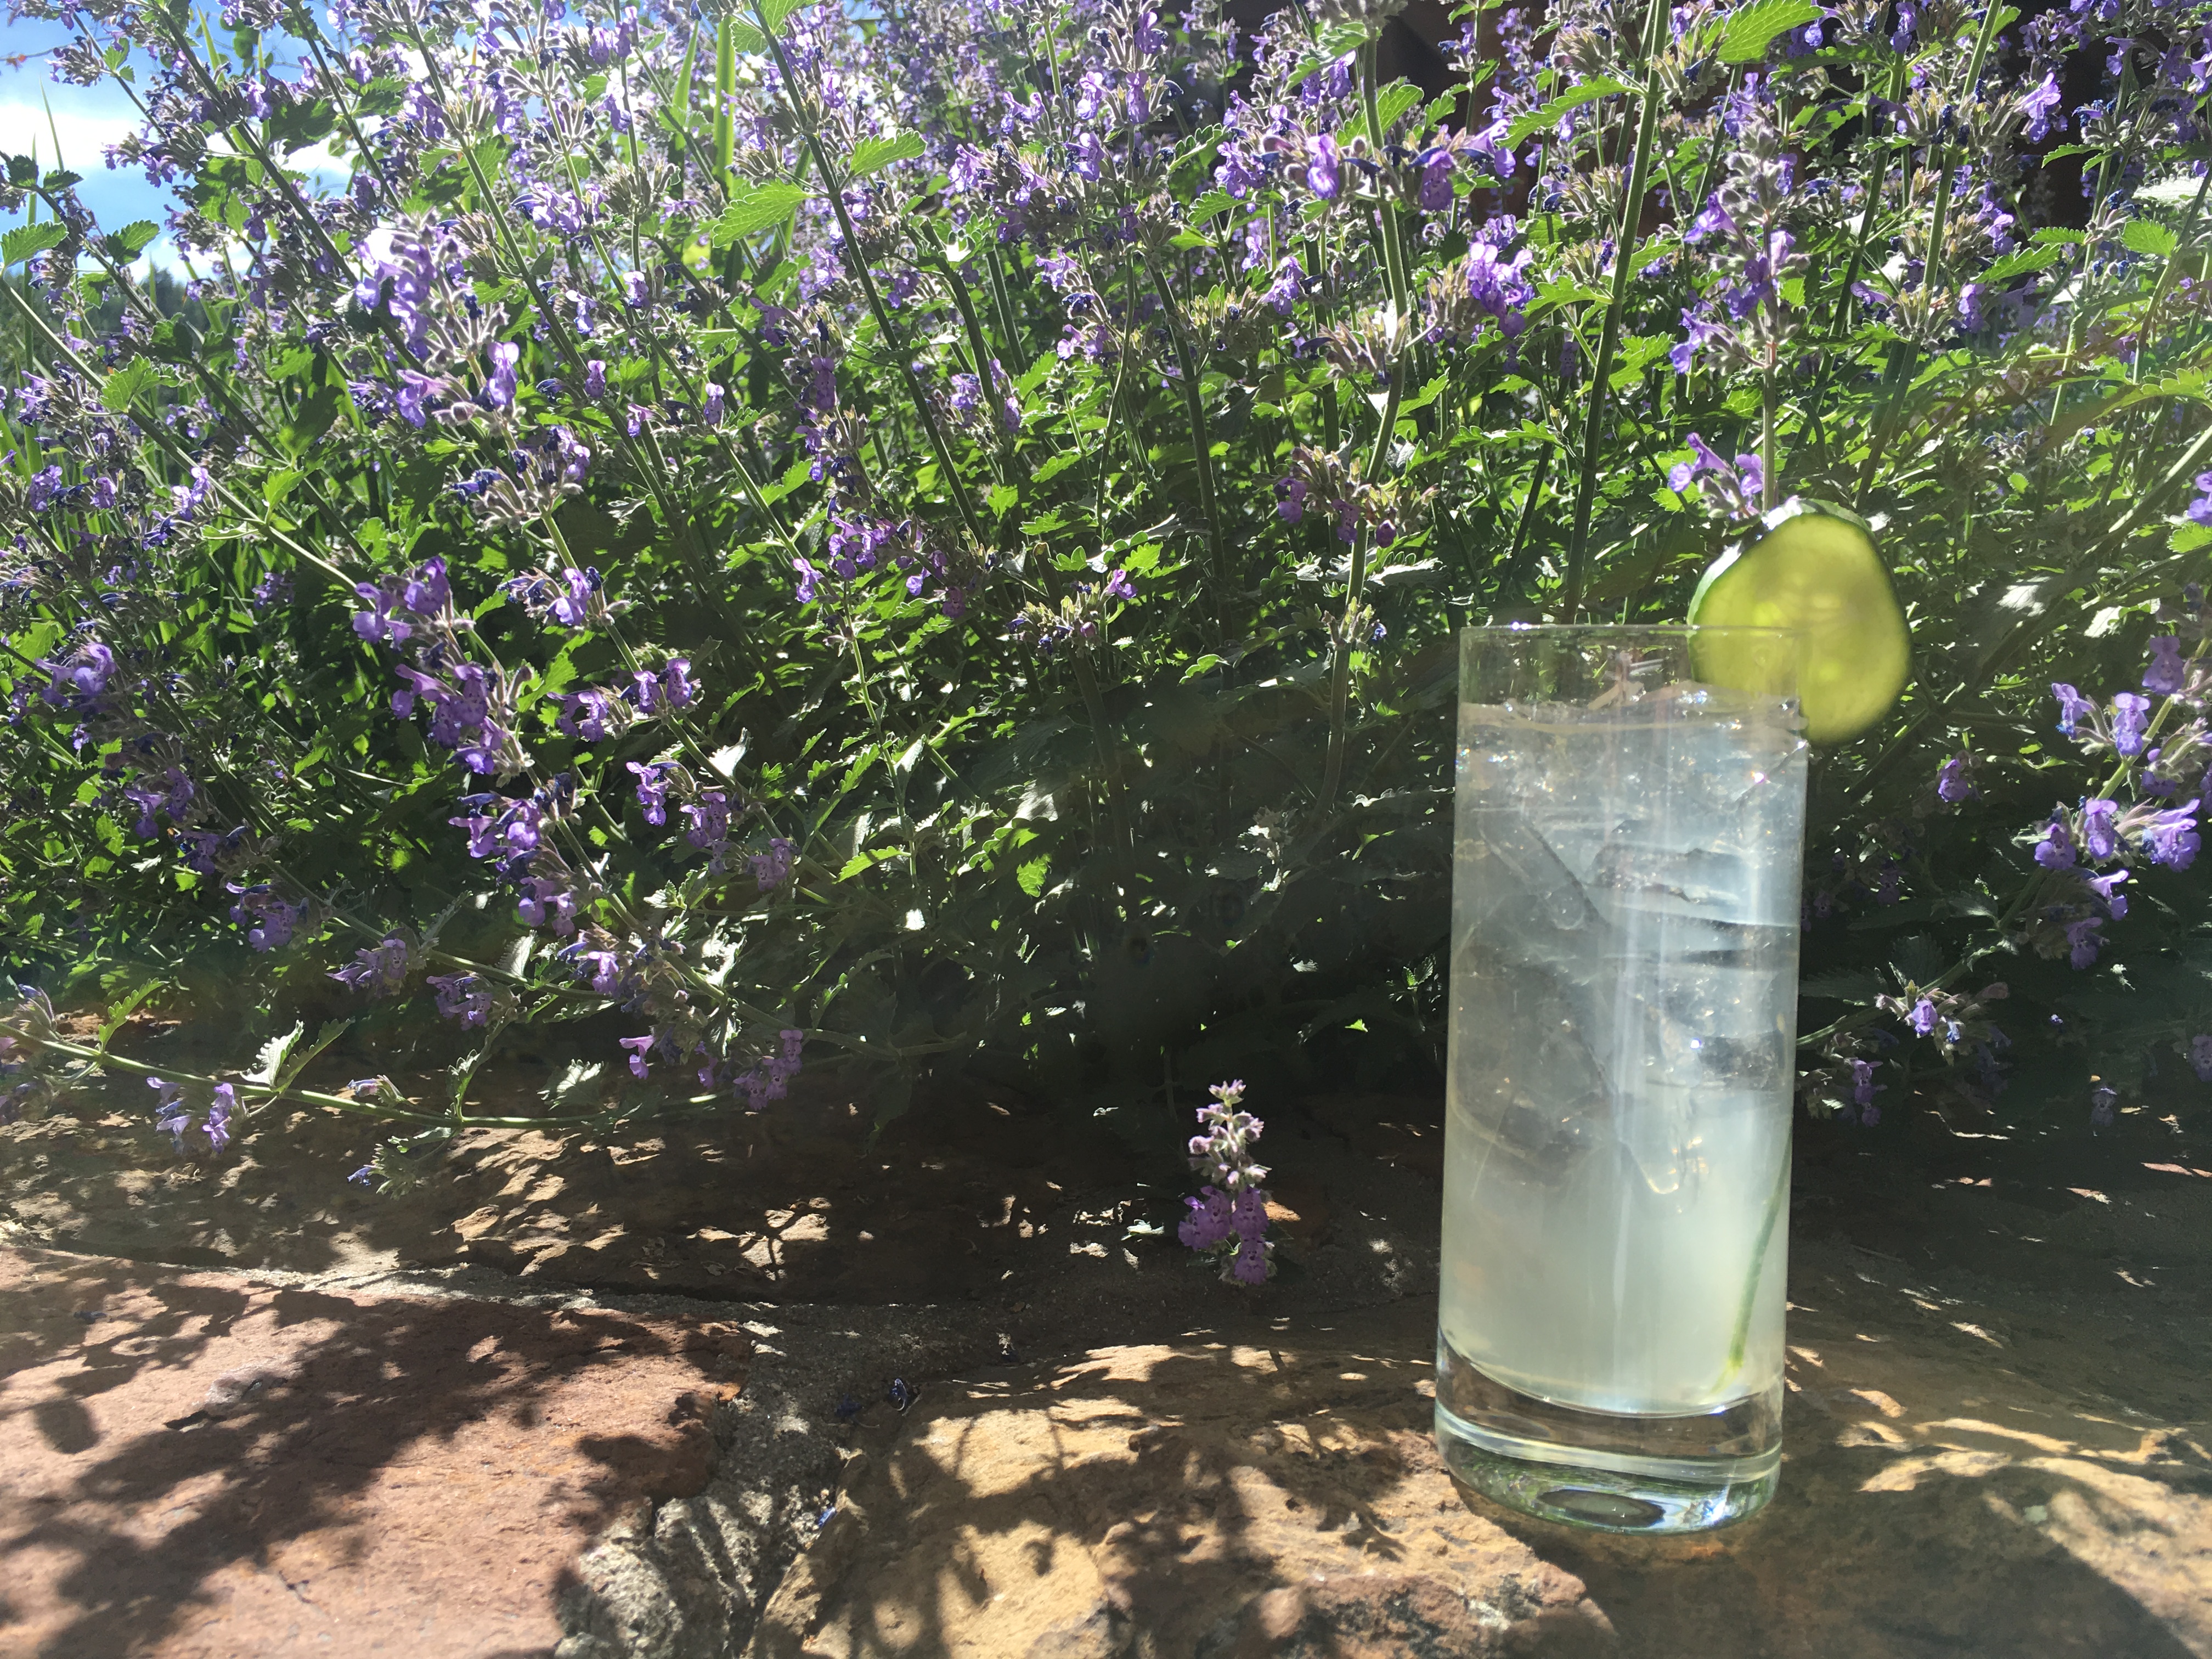 Enjoy a wildflower-inspired cocktail. Photo courtesy of The RItz Carlton Bachelor Gulch.